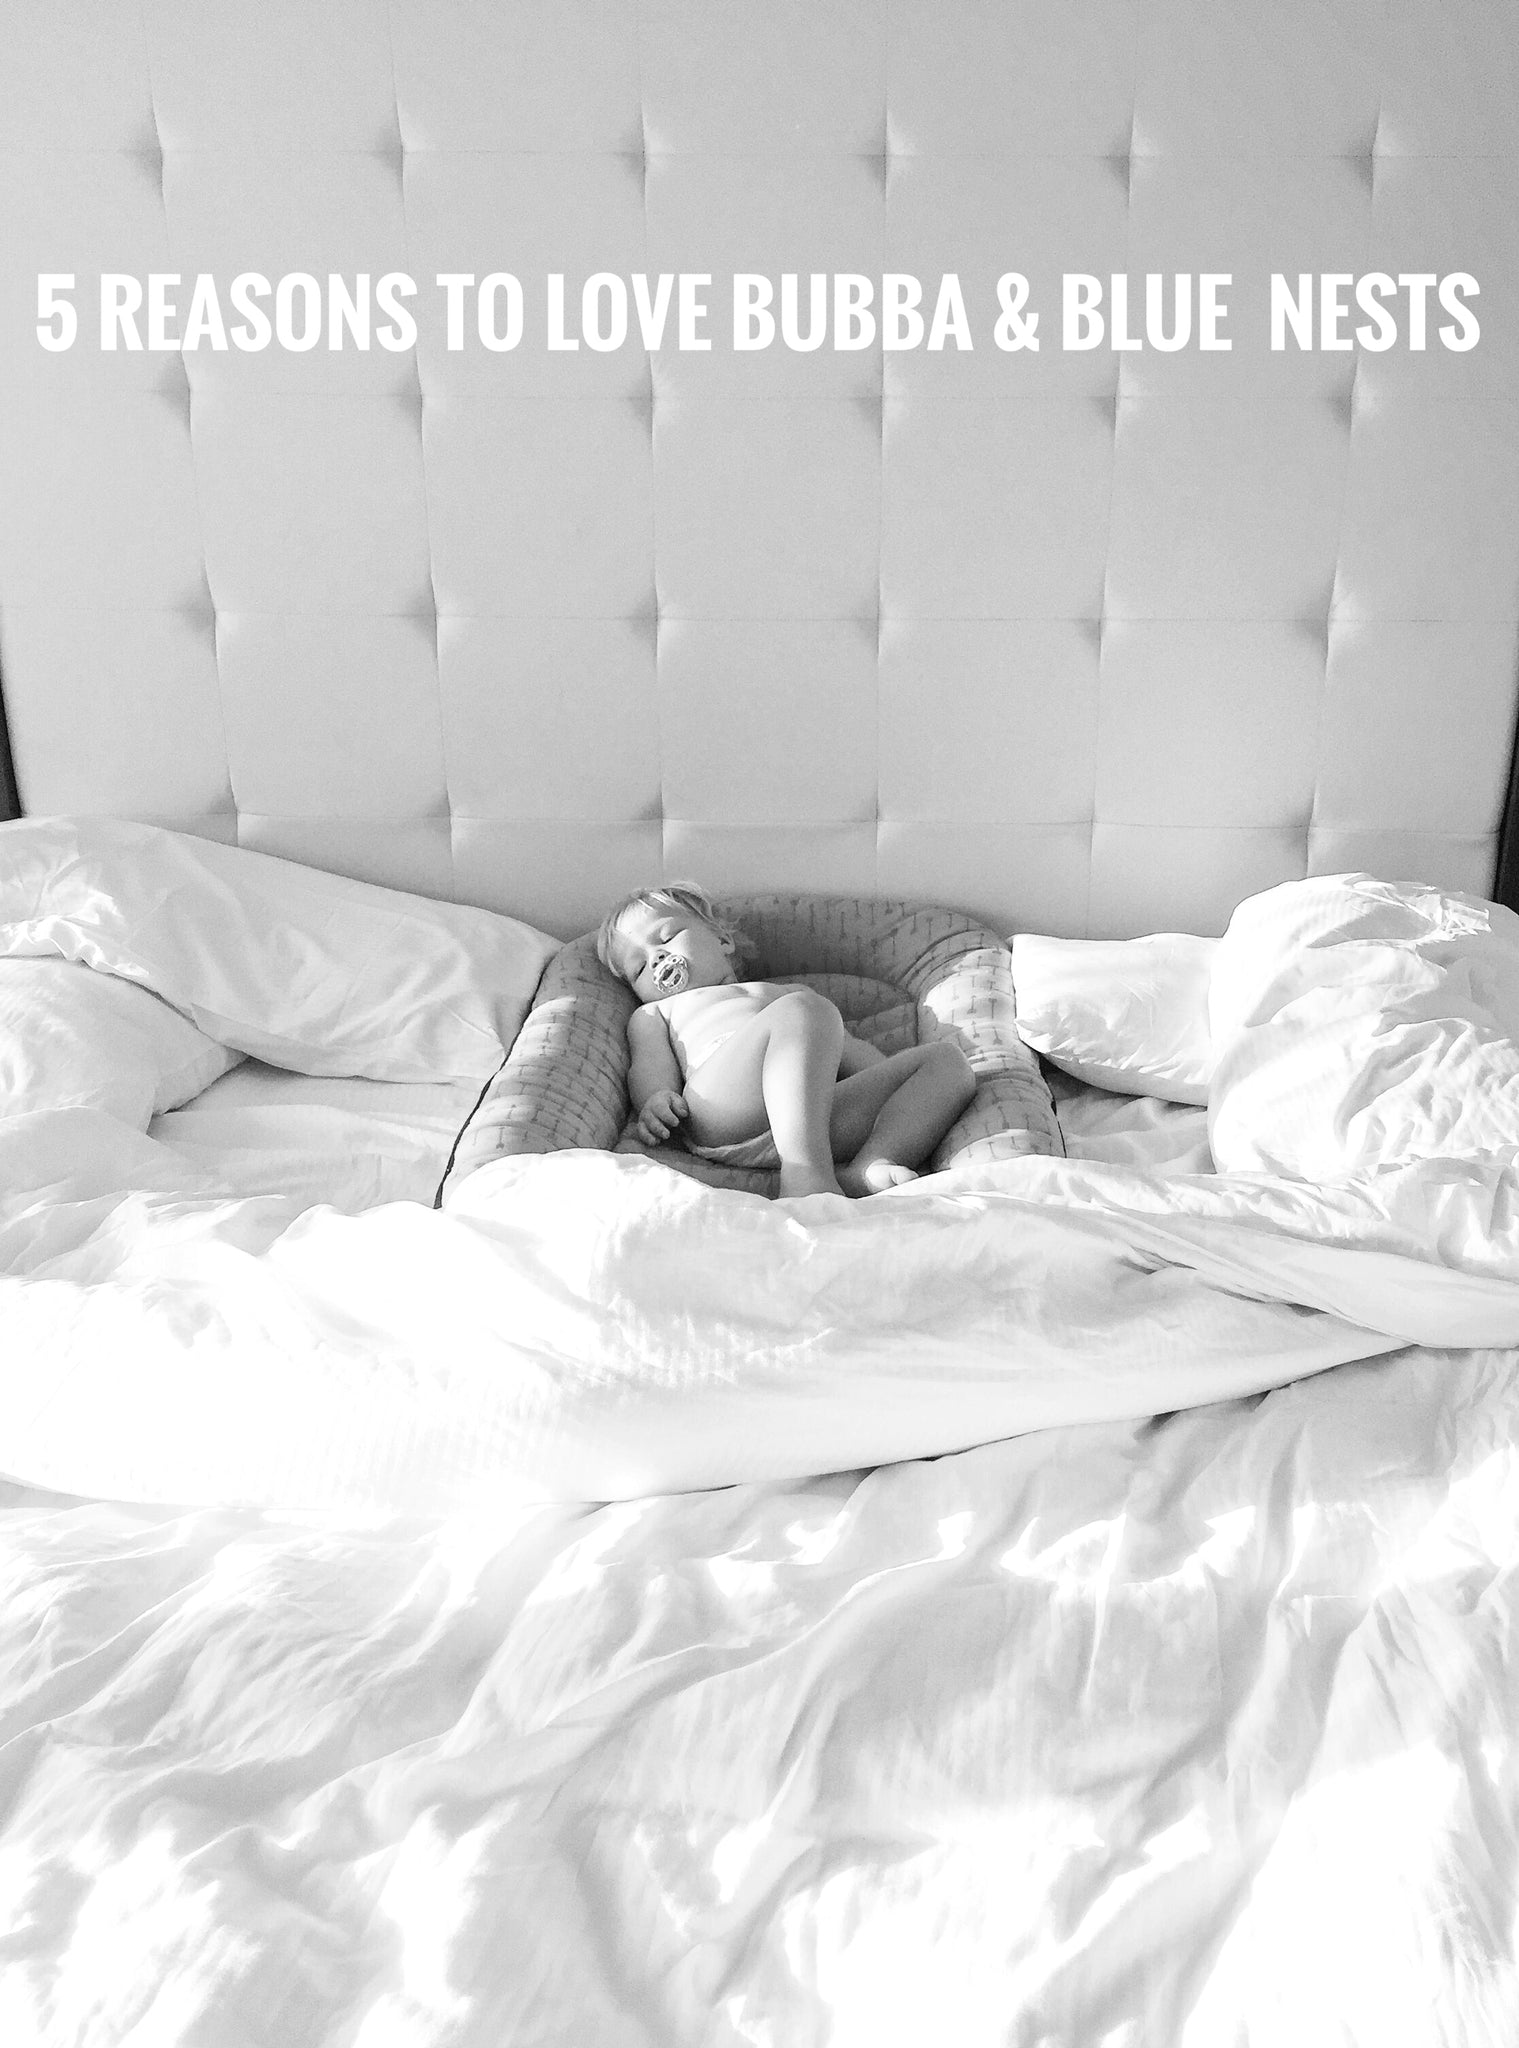 Reasons to Love Bubba & Blue baby Nest